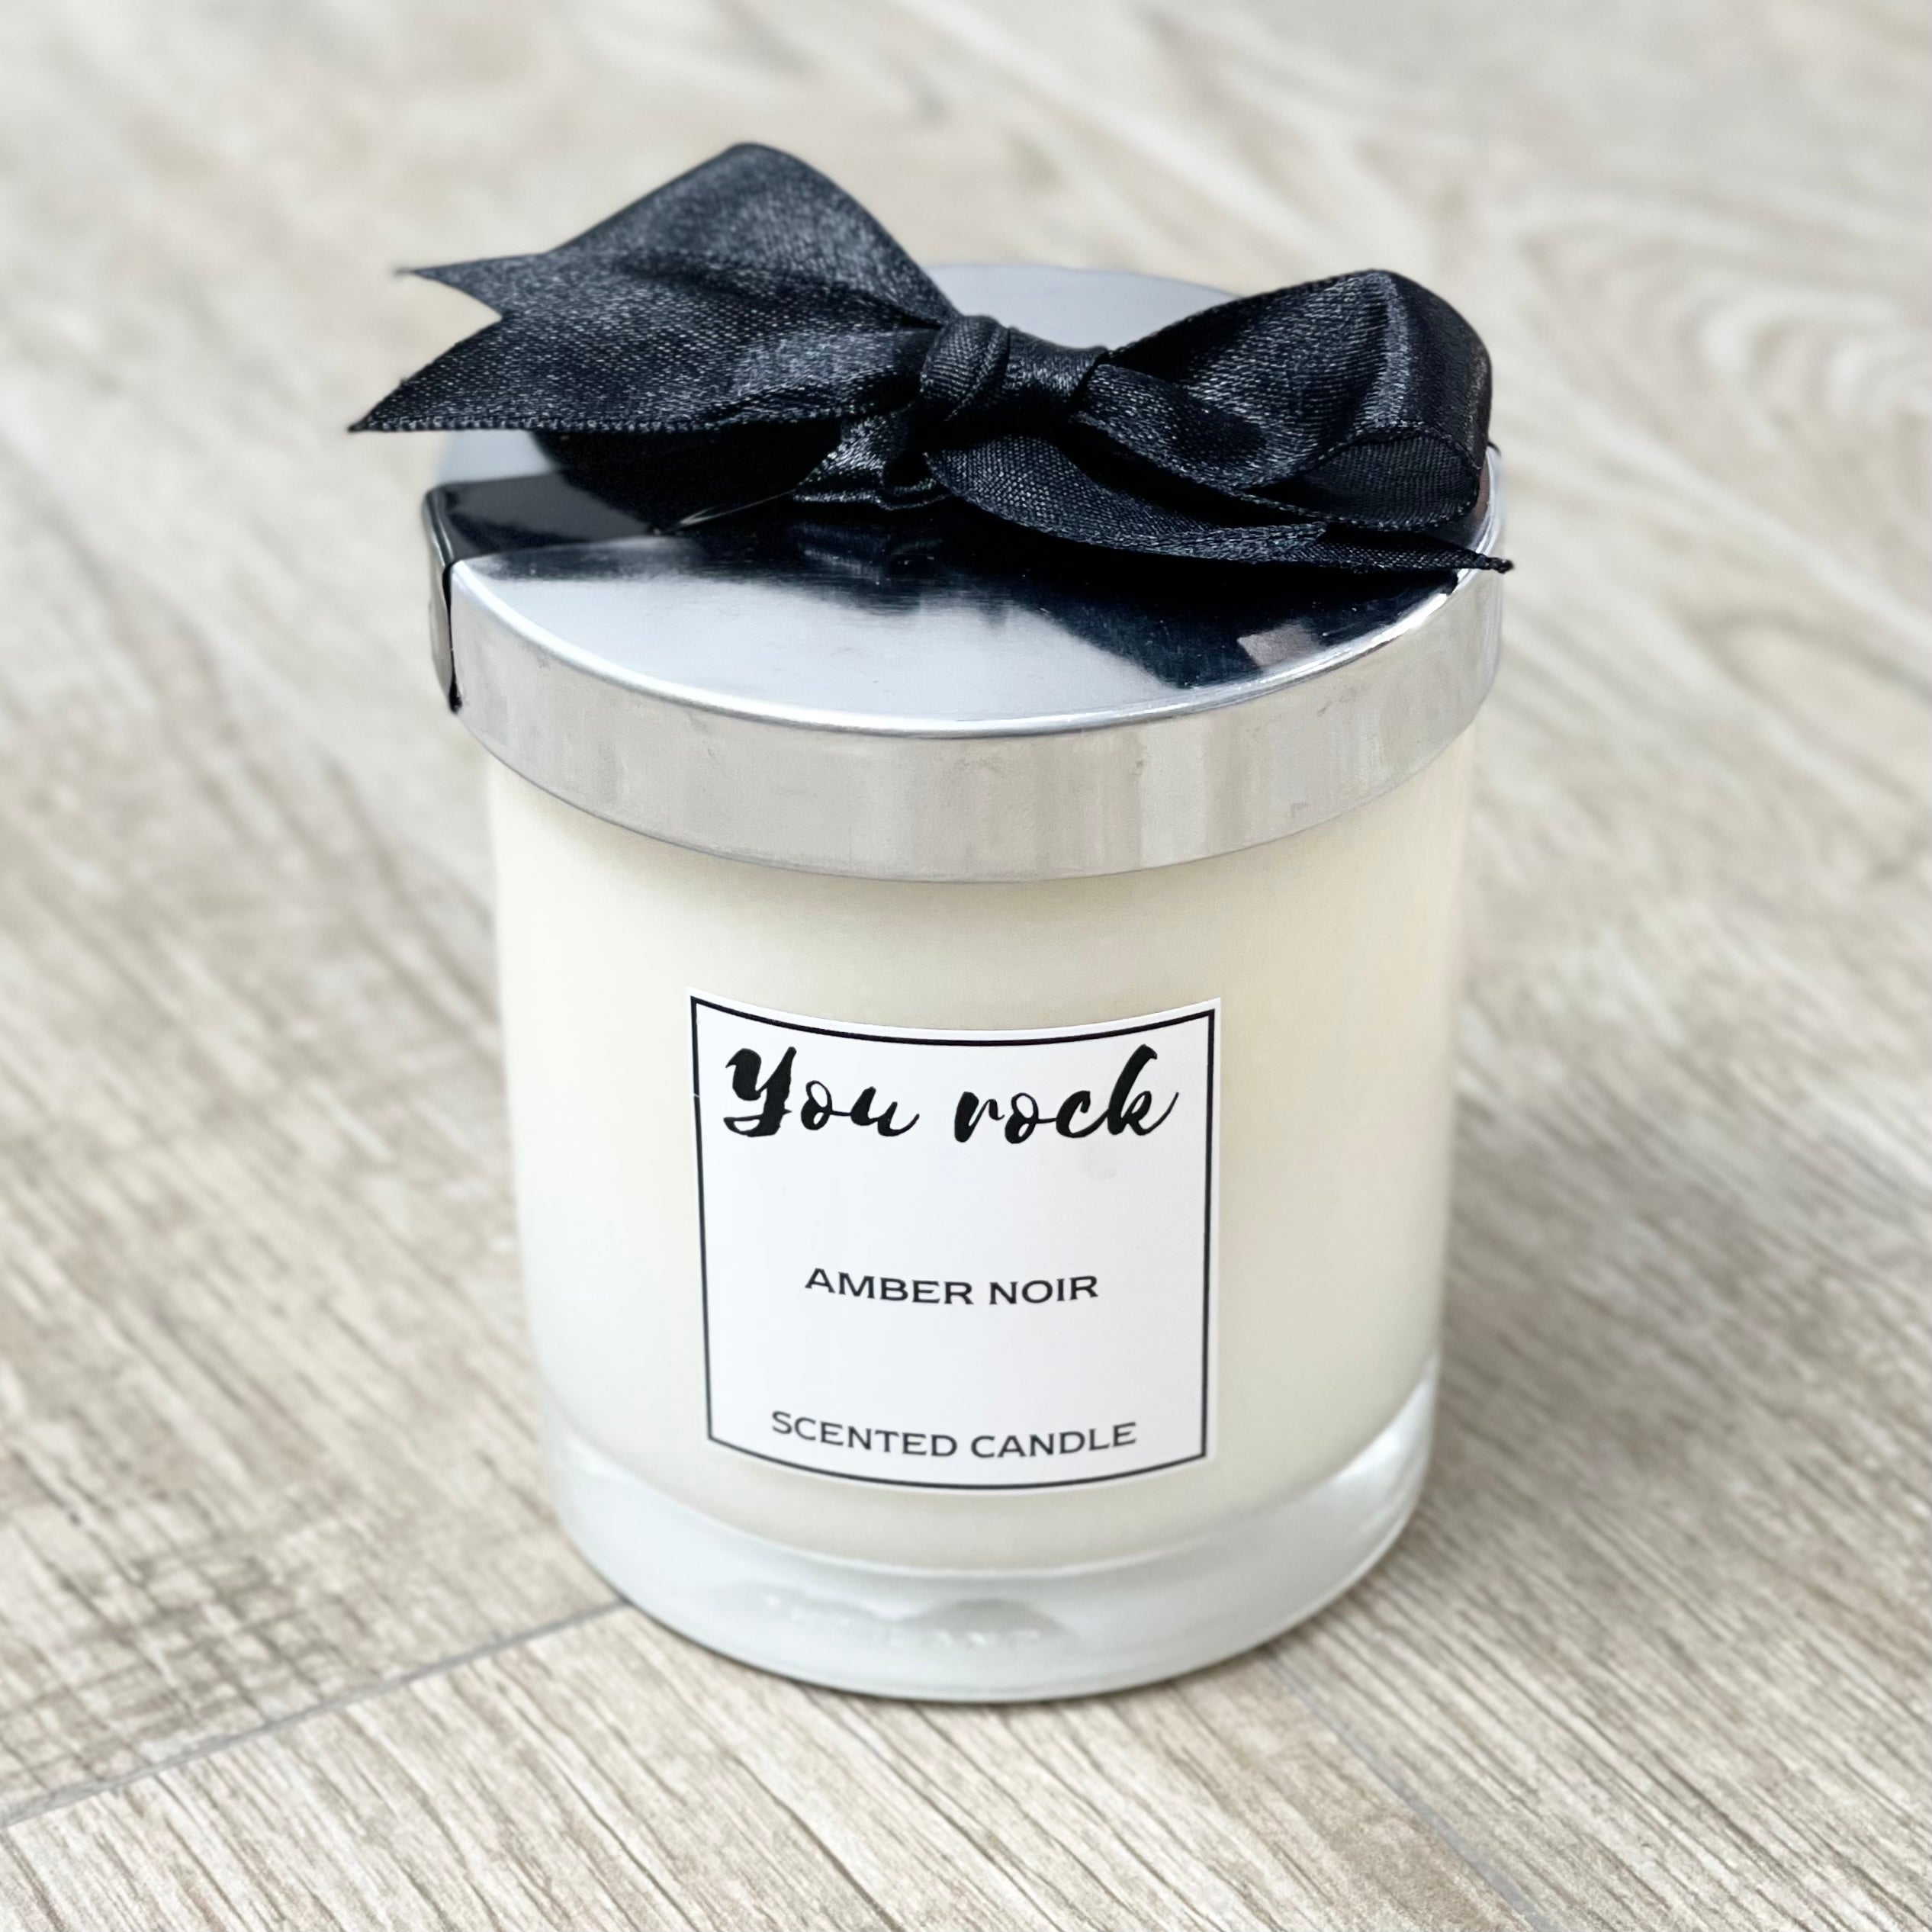 Natural Soy Wax Scented Candle - Amber Noir Fragrance 